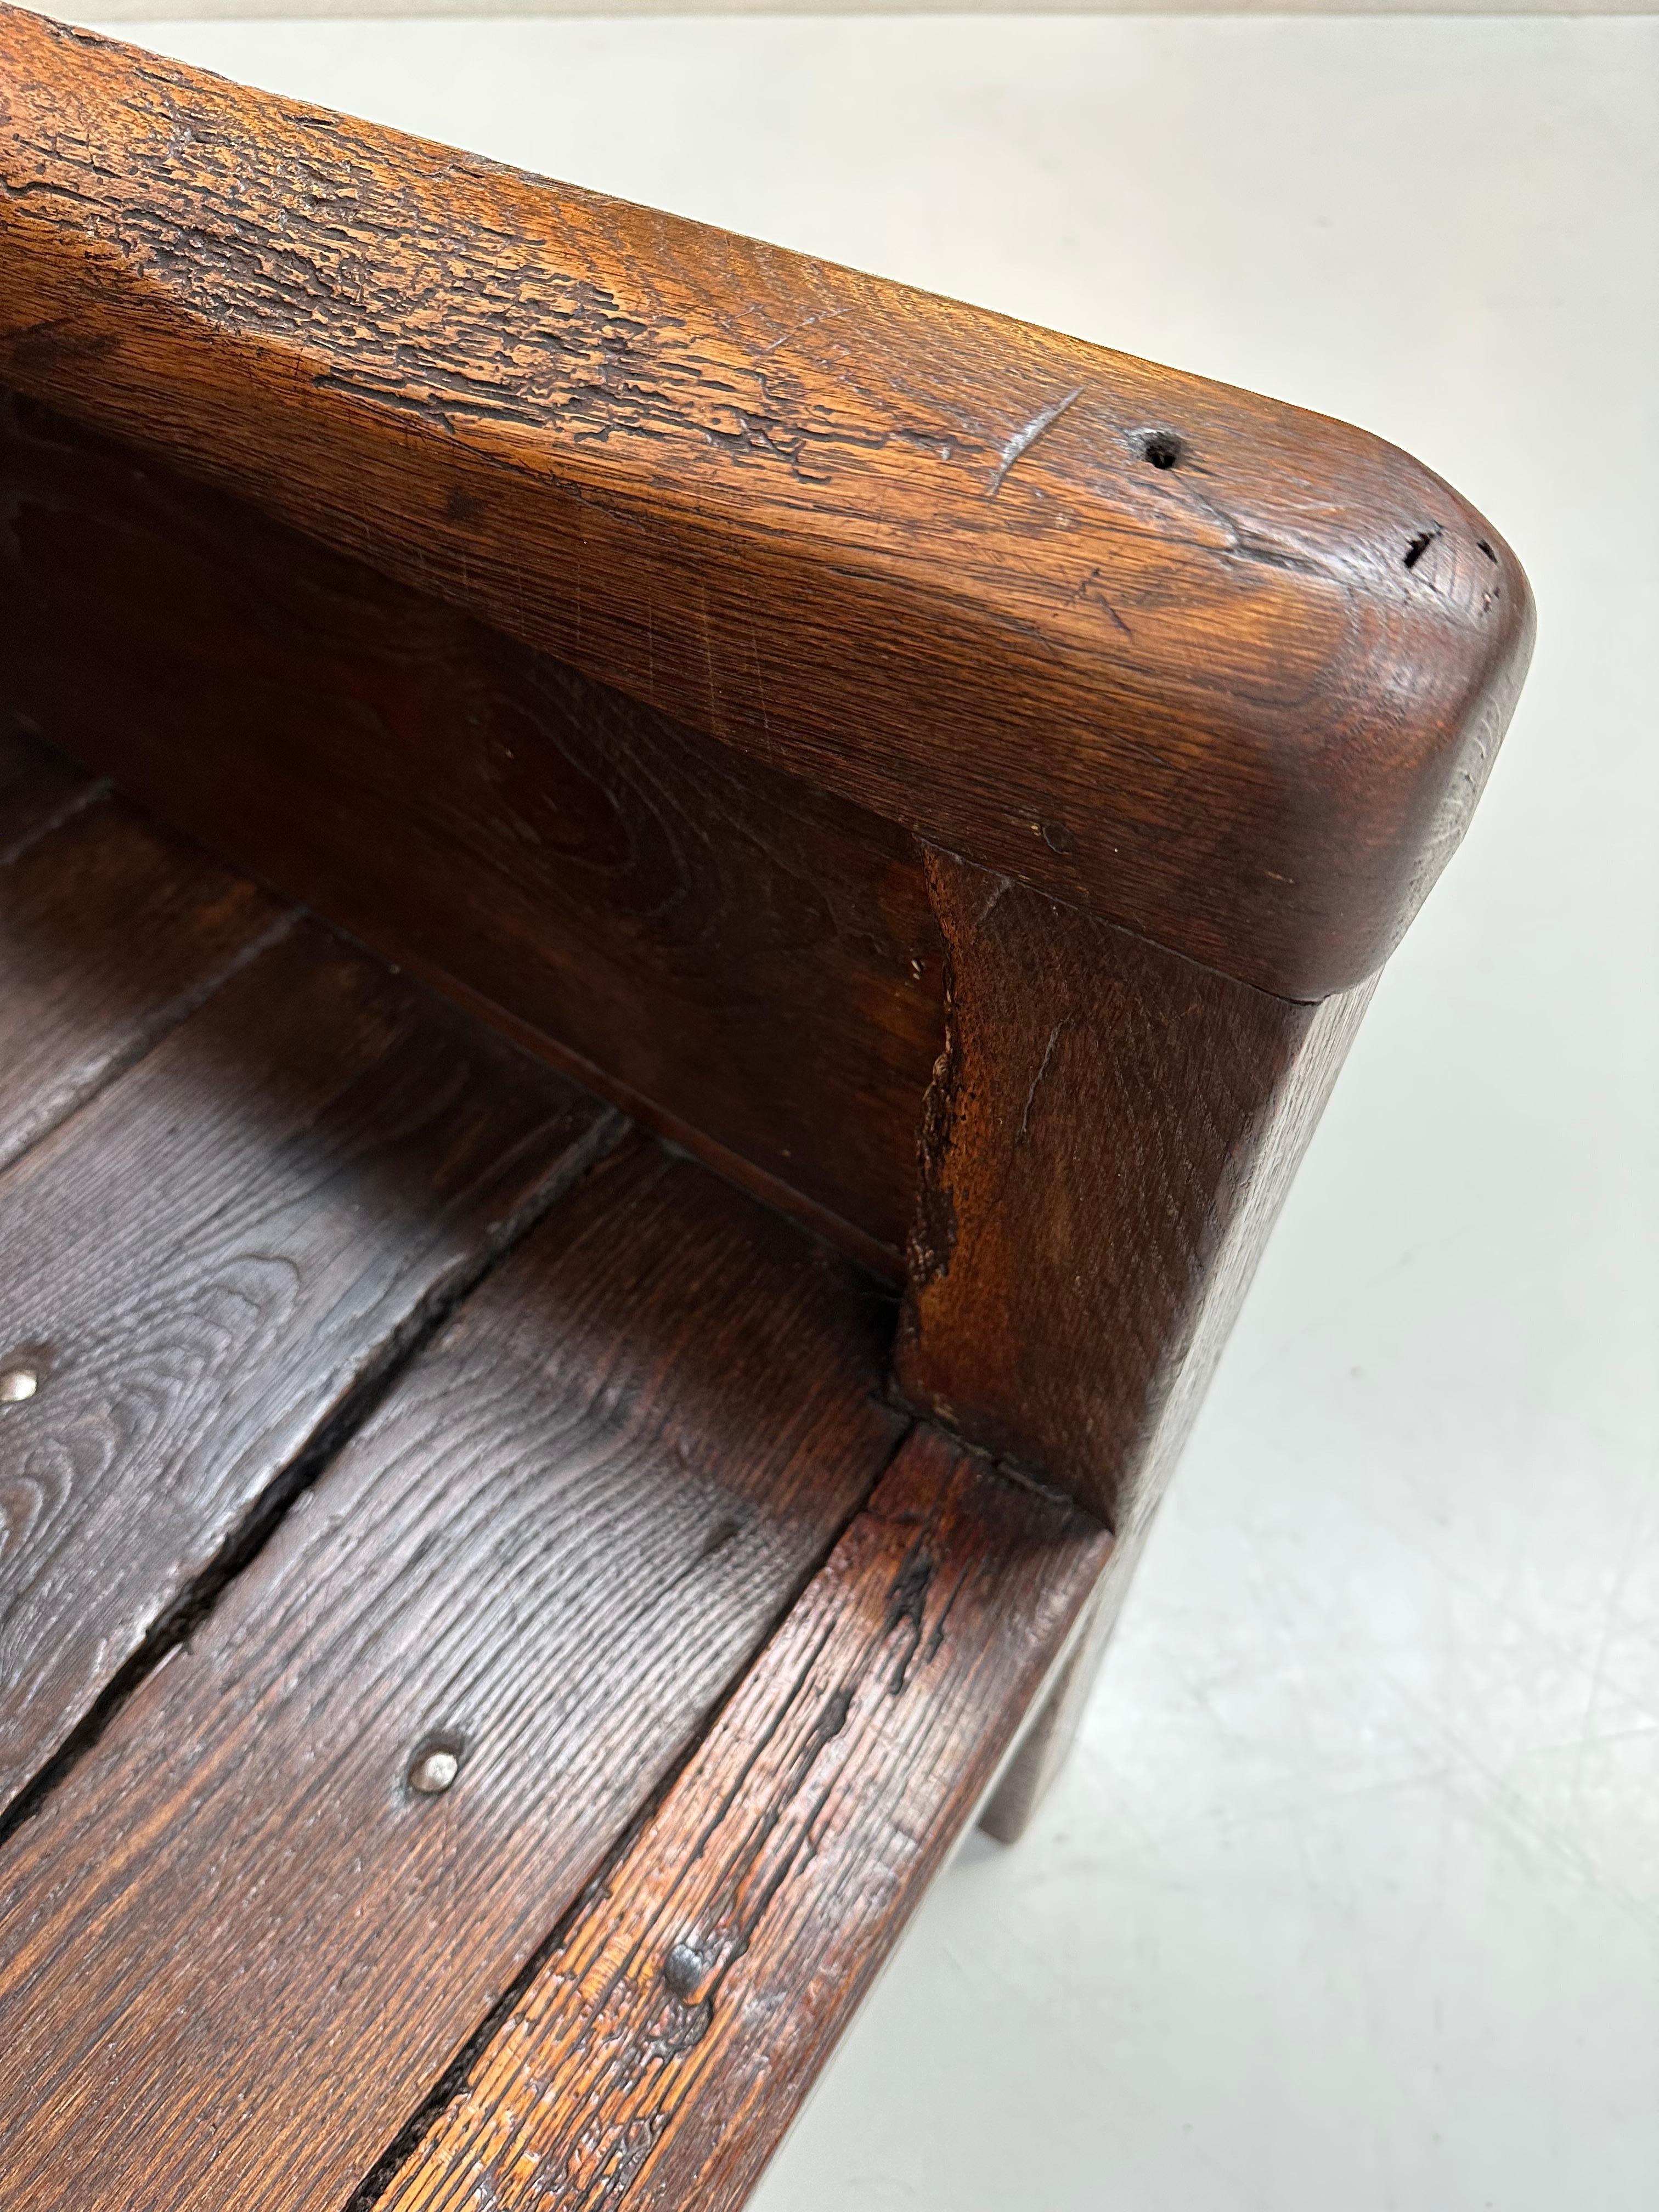 Antique Handmade Minimalistic Spanish Chestnut Wood Bench, Early 19th Century For Sale 8